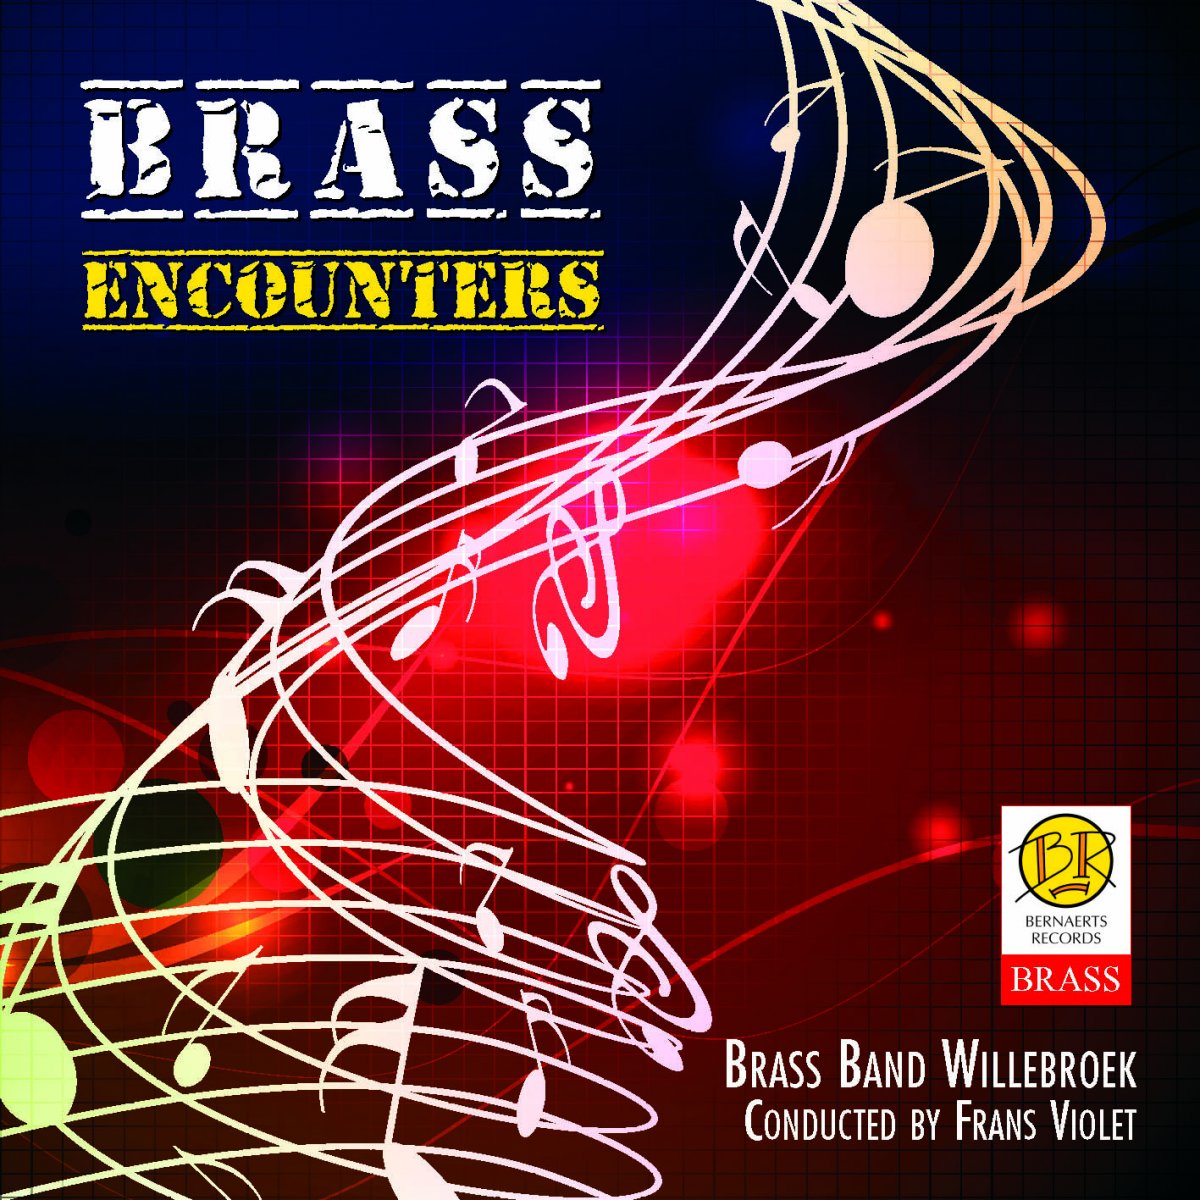 Brass Encounters - click here